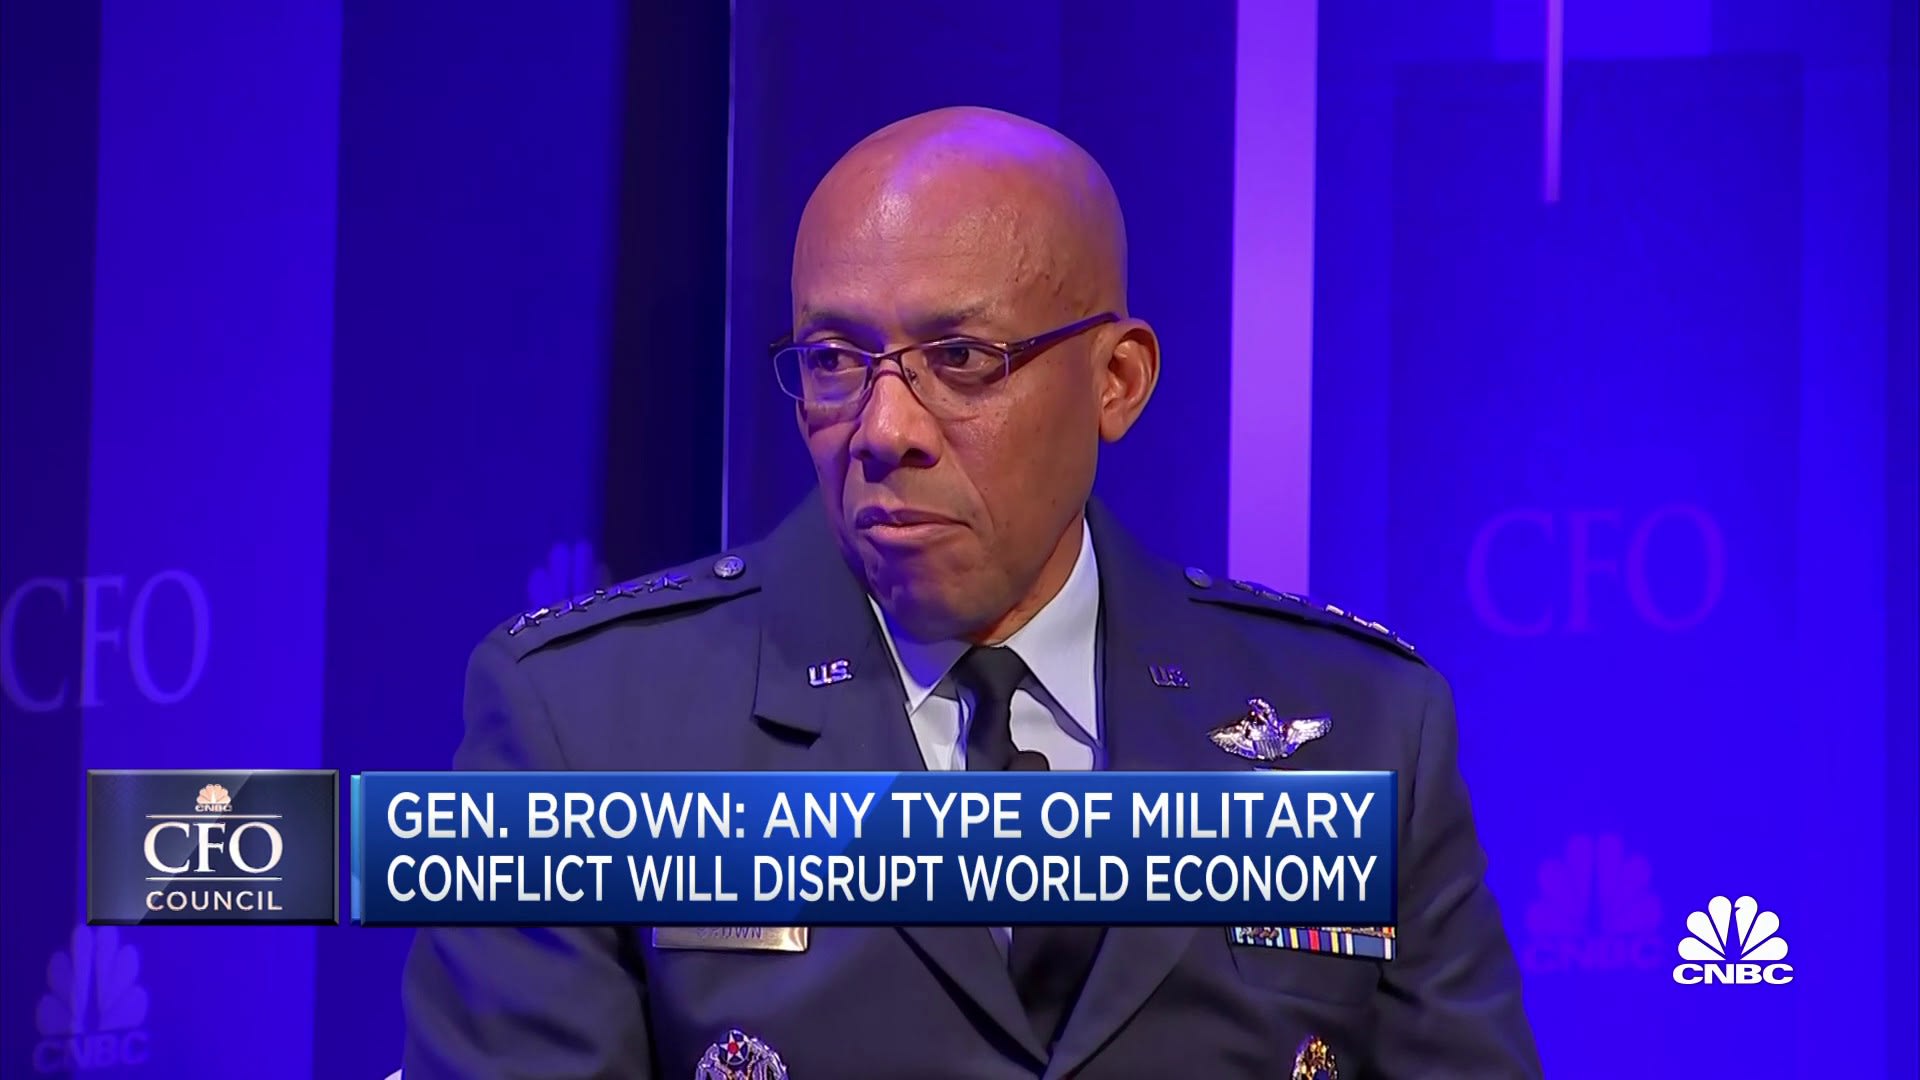 Gen. Charles Brown: Any type of military conflict will disrupt the world economy